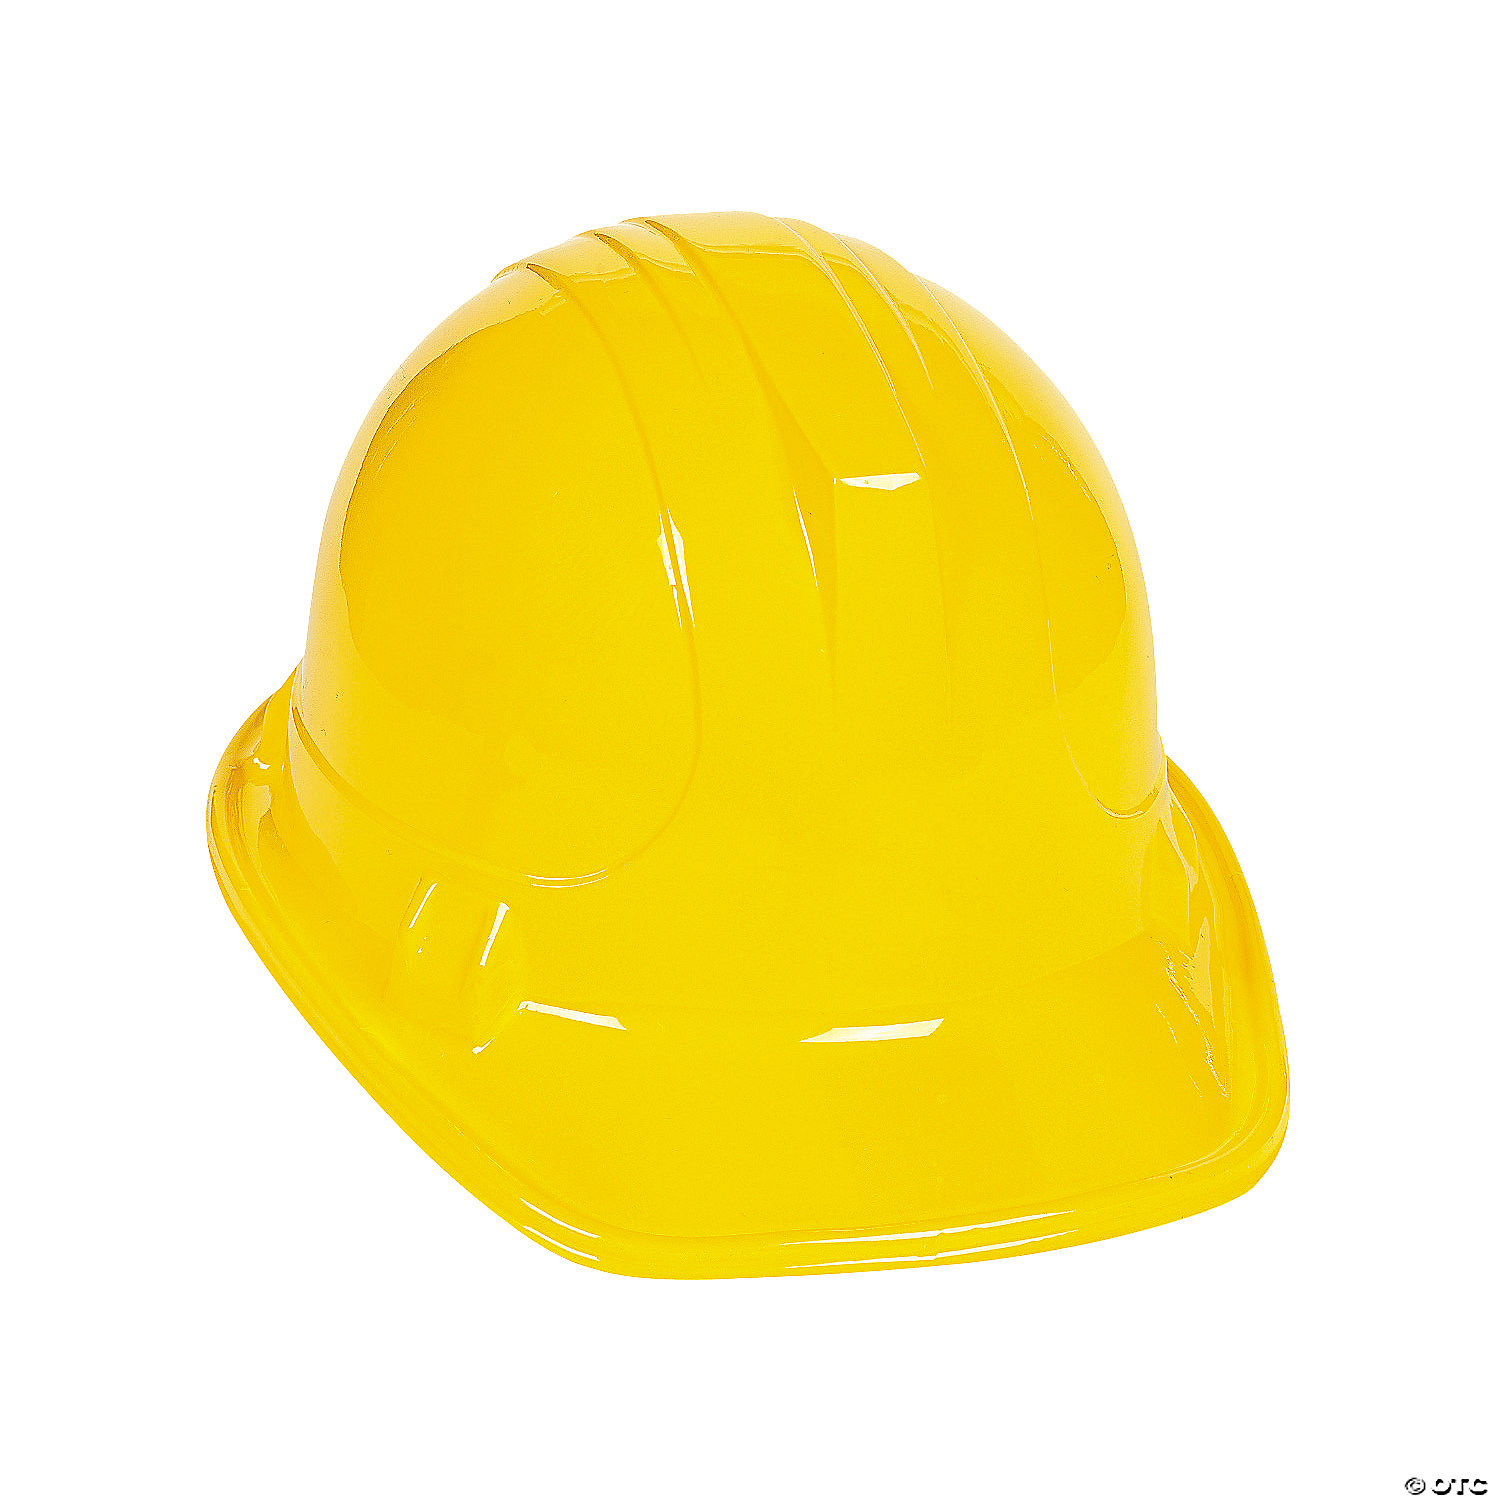 Children's Novelty Hard Hat Great for Parties! White 